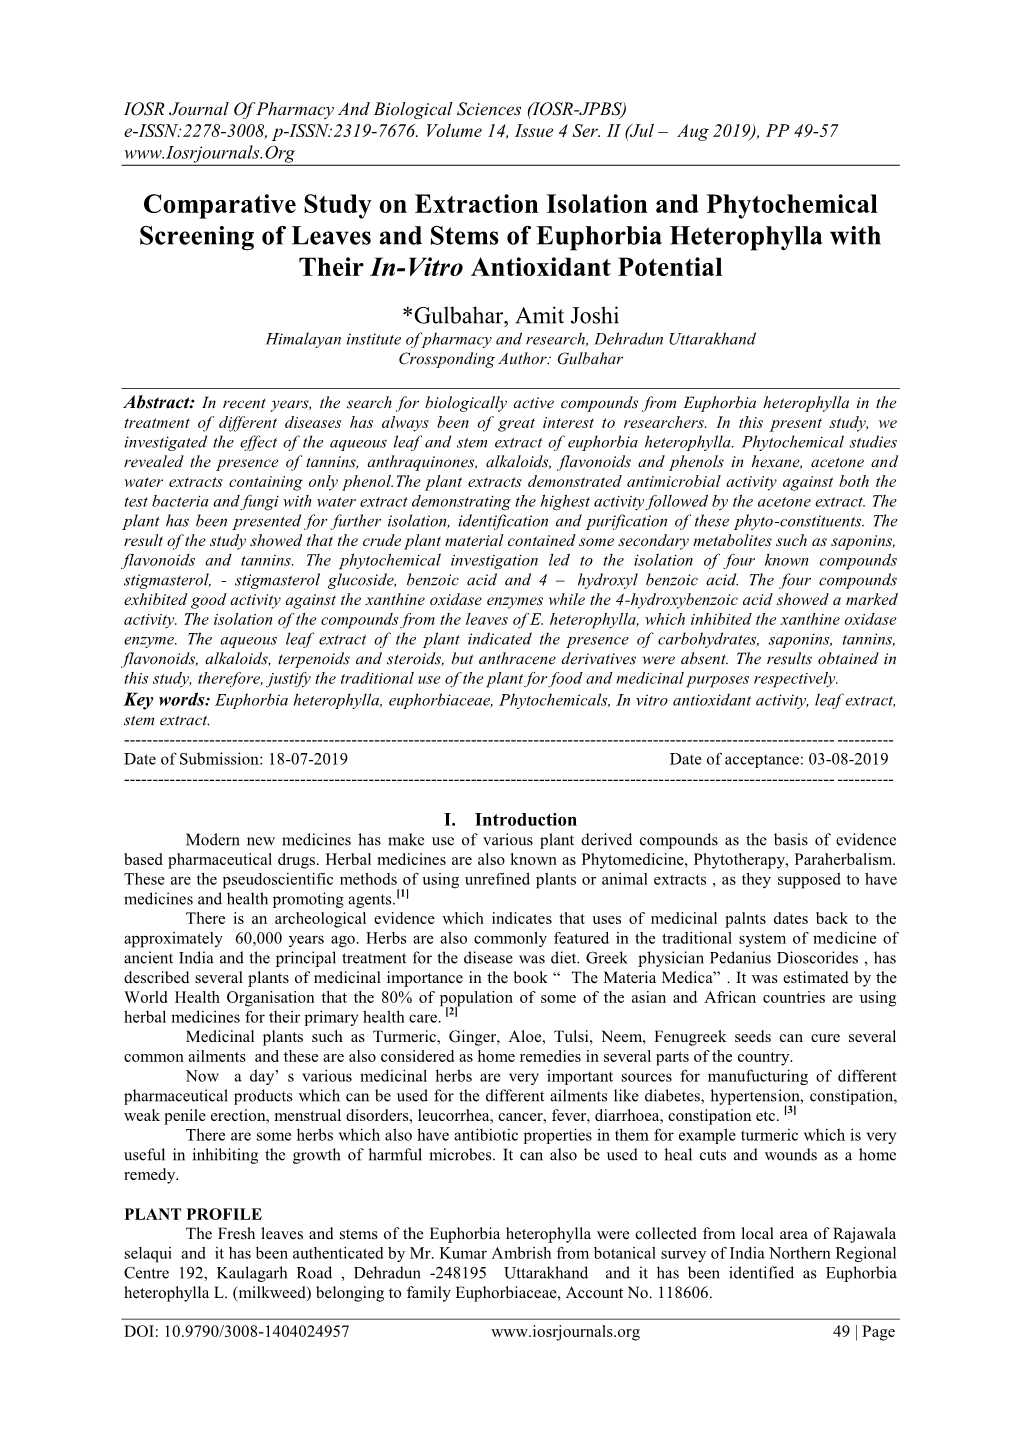 Comparative Study on Extraction Isolation and Phytochemical Screening of Leaves and Stems of Euphorbia Heterophylla with Their In-Vitro Antioxidant Potential